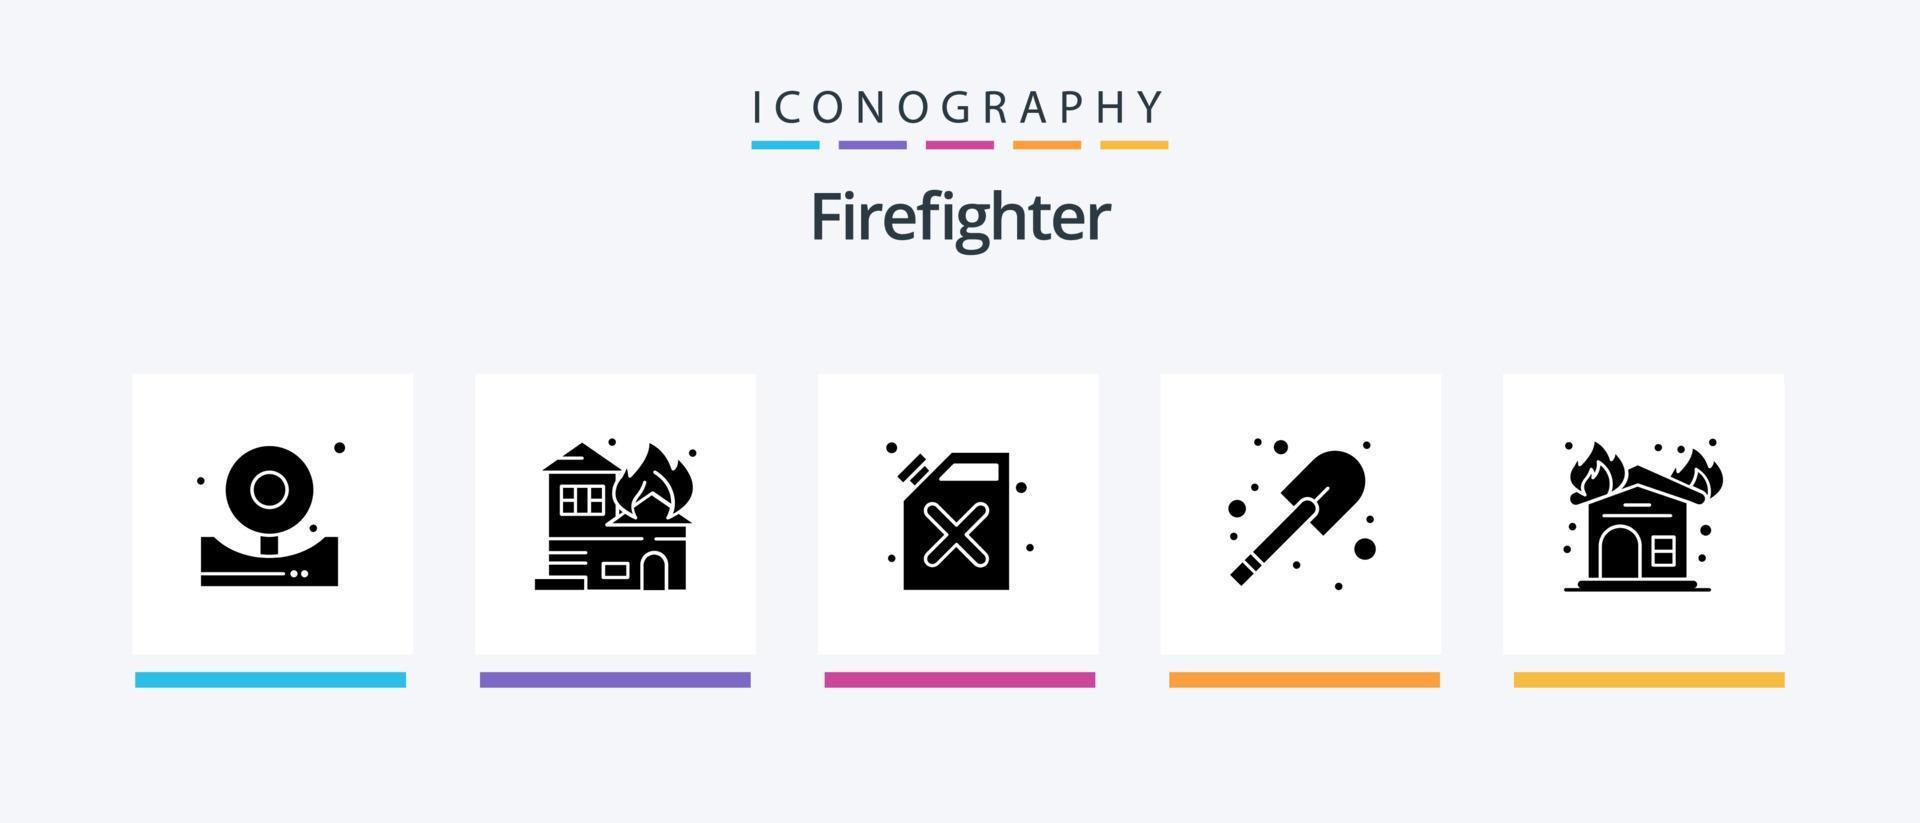 Firefighter Glyph 5 Icon Pack Including firehouse. fireplace. barrel. fire. firefighter. Creative Icons Design vector